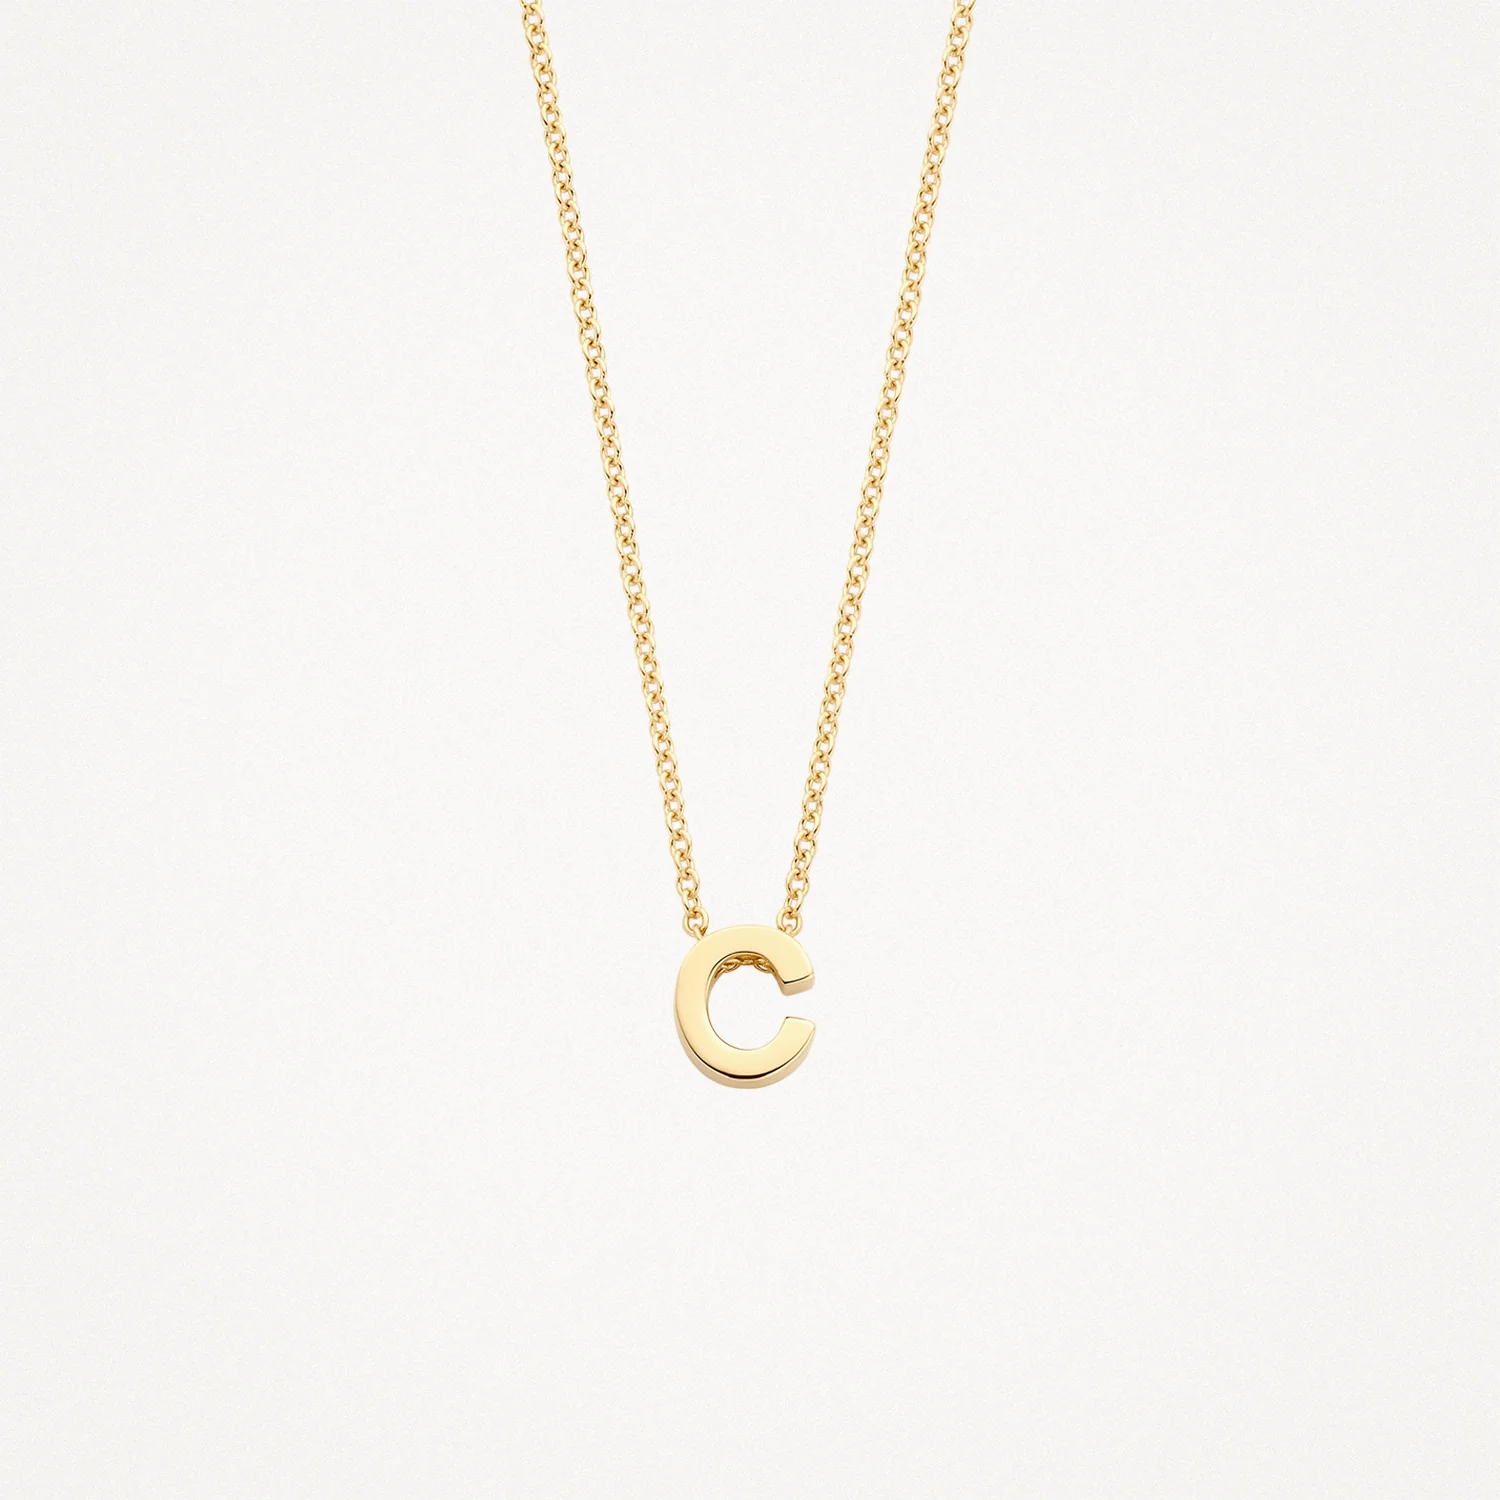 Blush Yellow Gold Letter Necklace - C